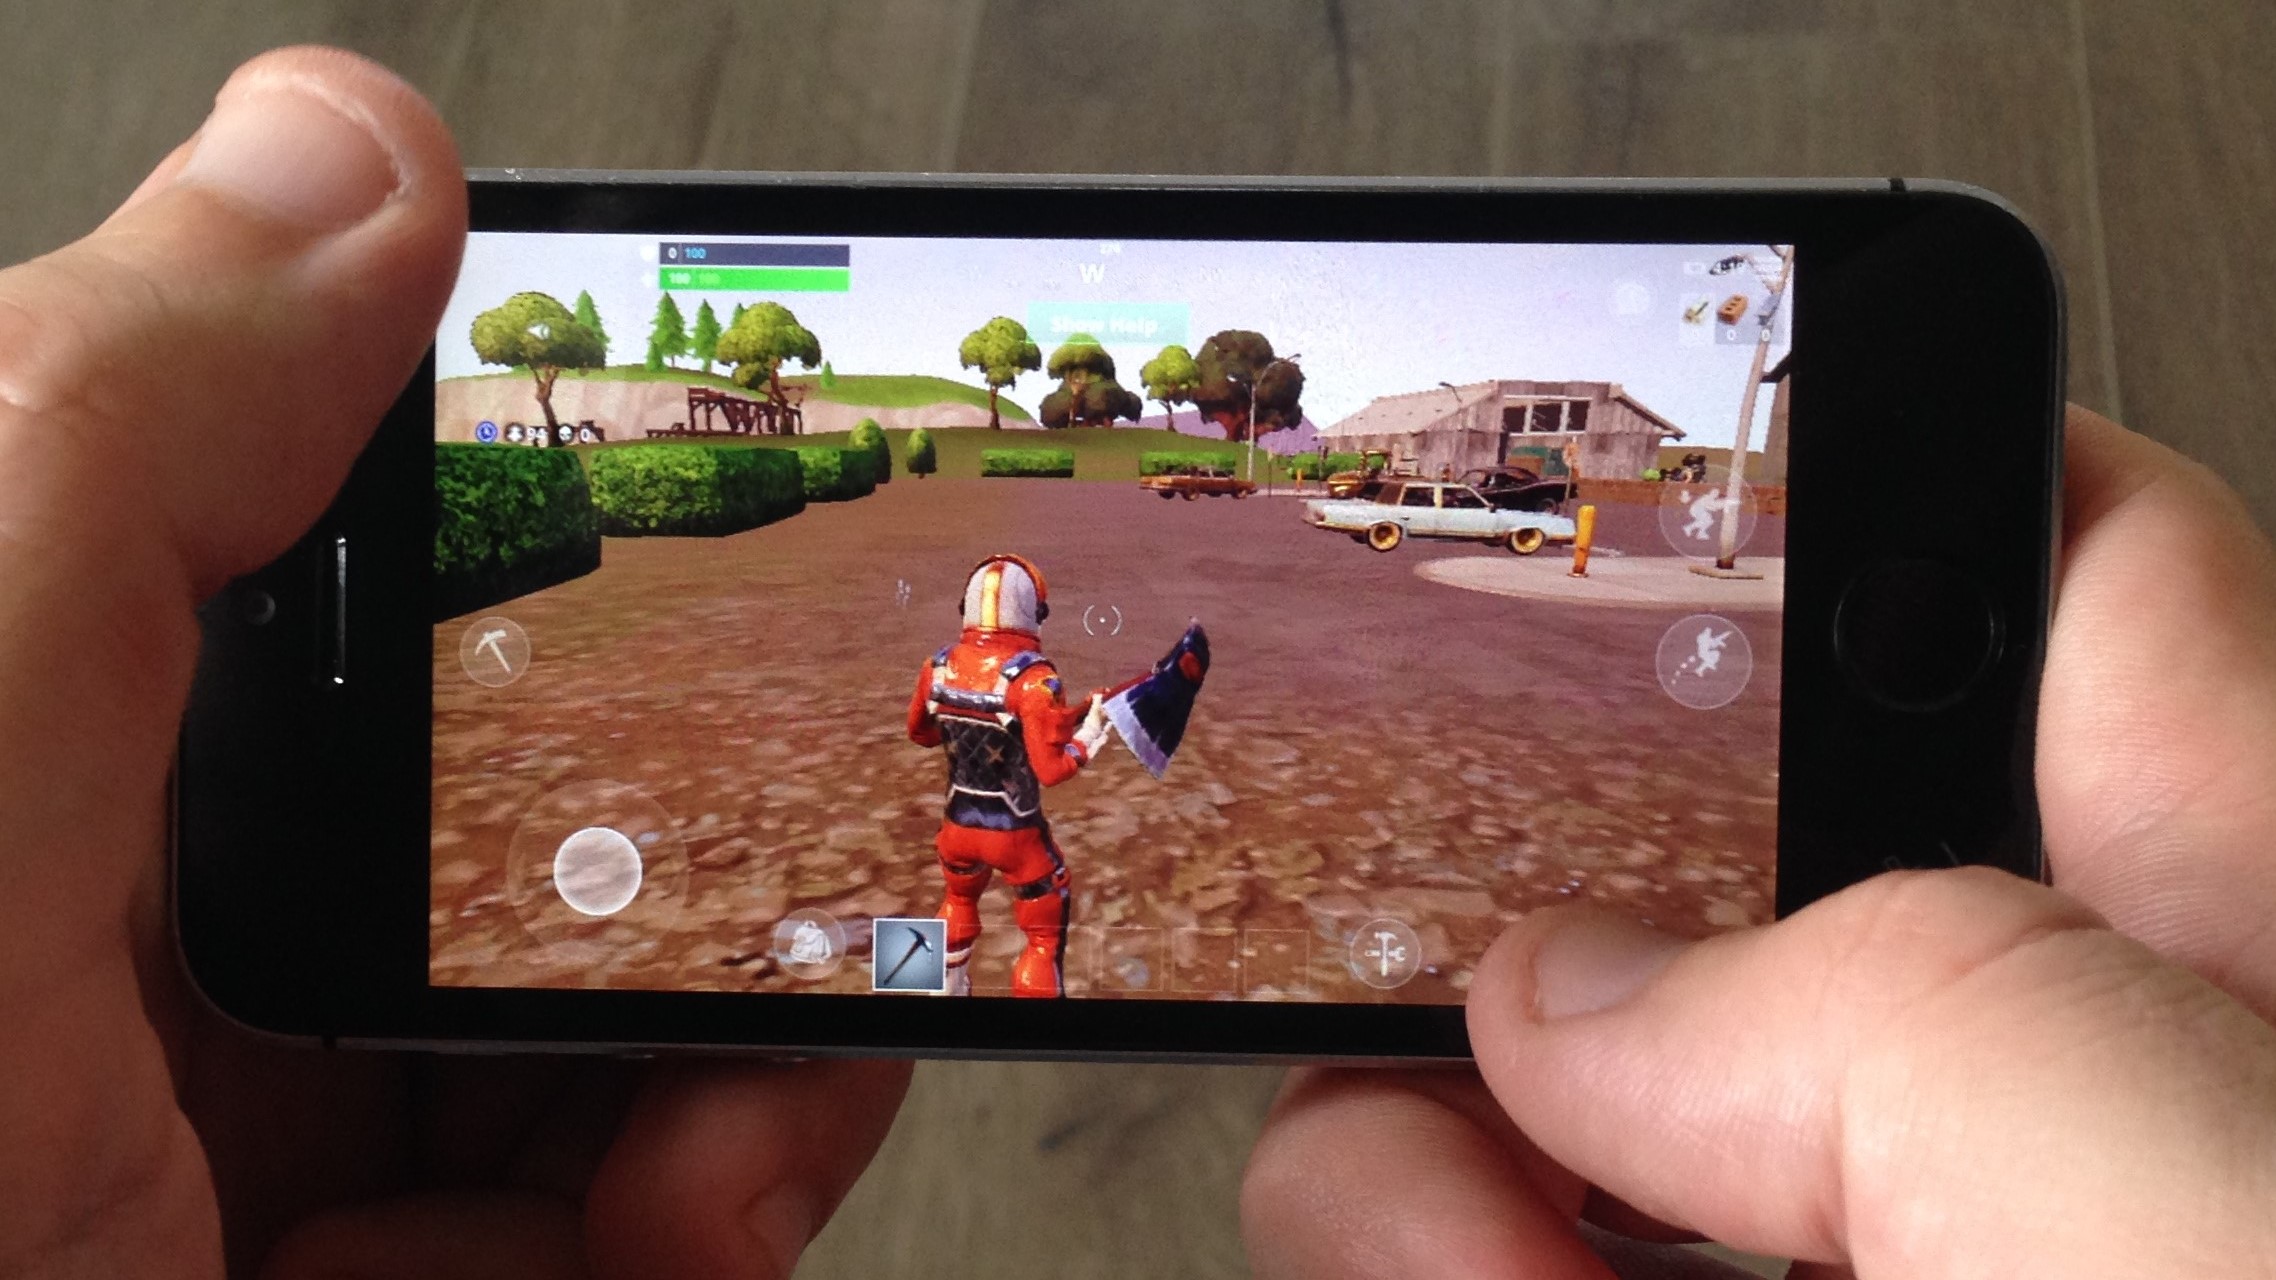 Hello, in the first few years of playing Fortnite on Android, I